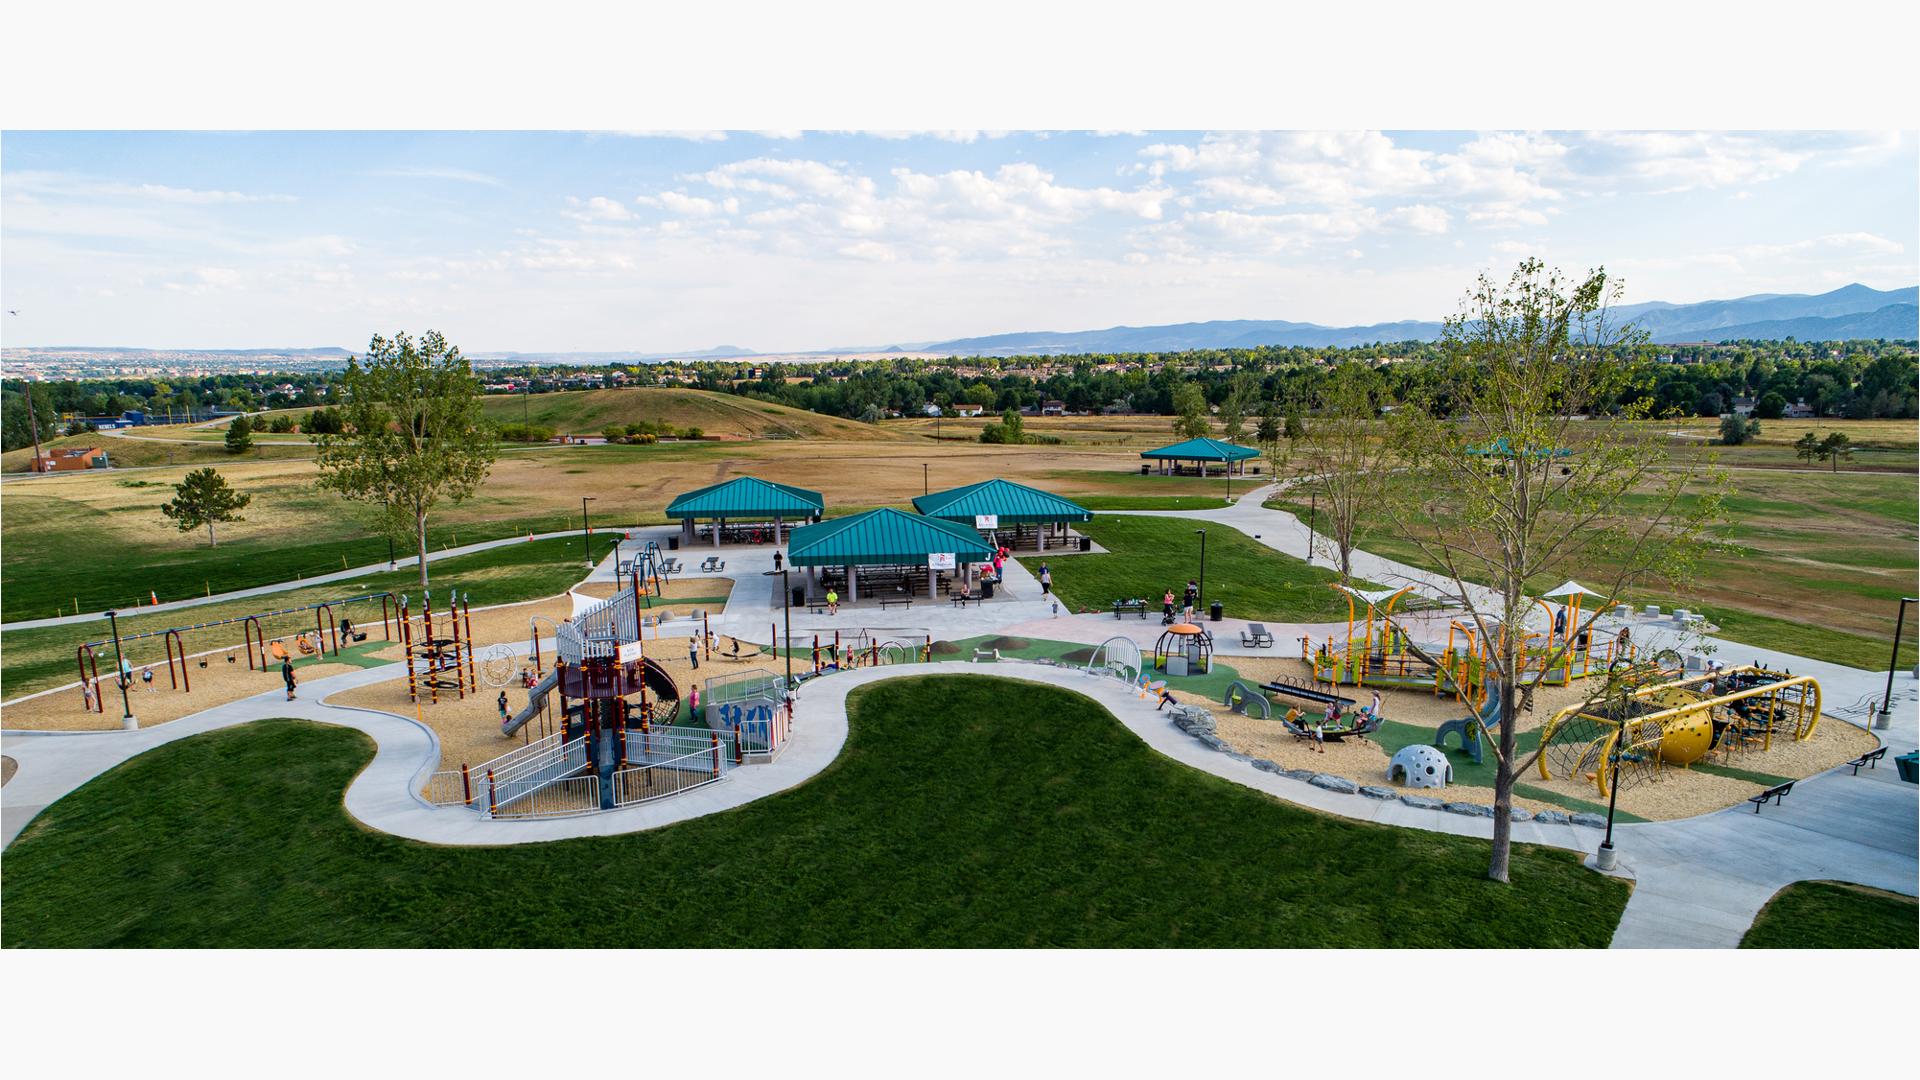 A very large playground with several play areas - including a trombone-themed play structure